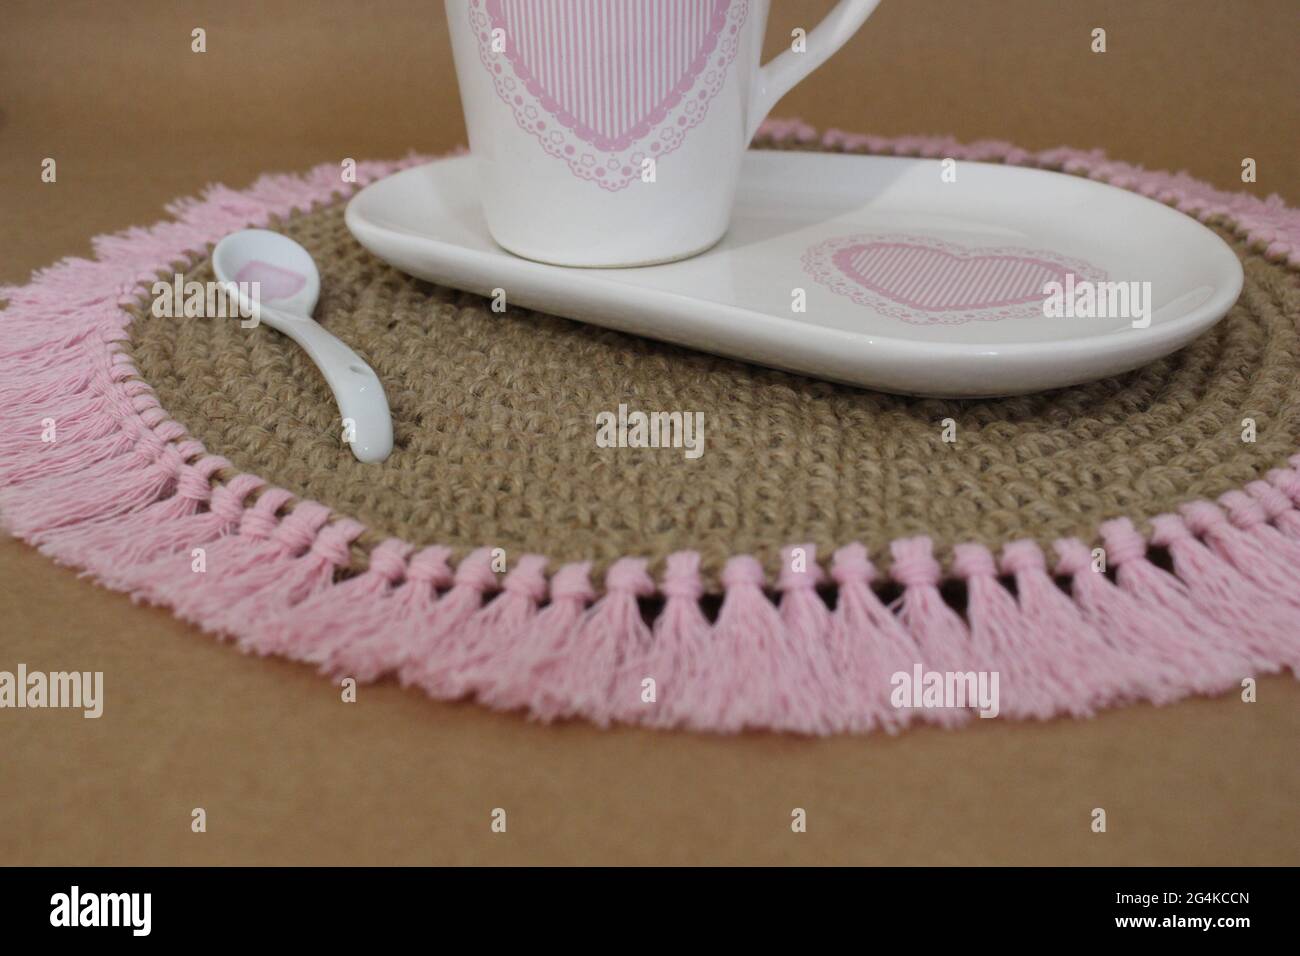 A closeup shot of a brown knit placemat with pink tassels Stock Photo